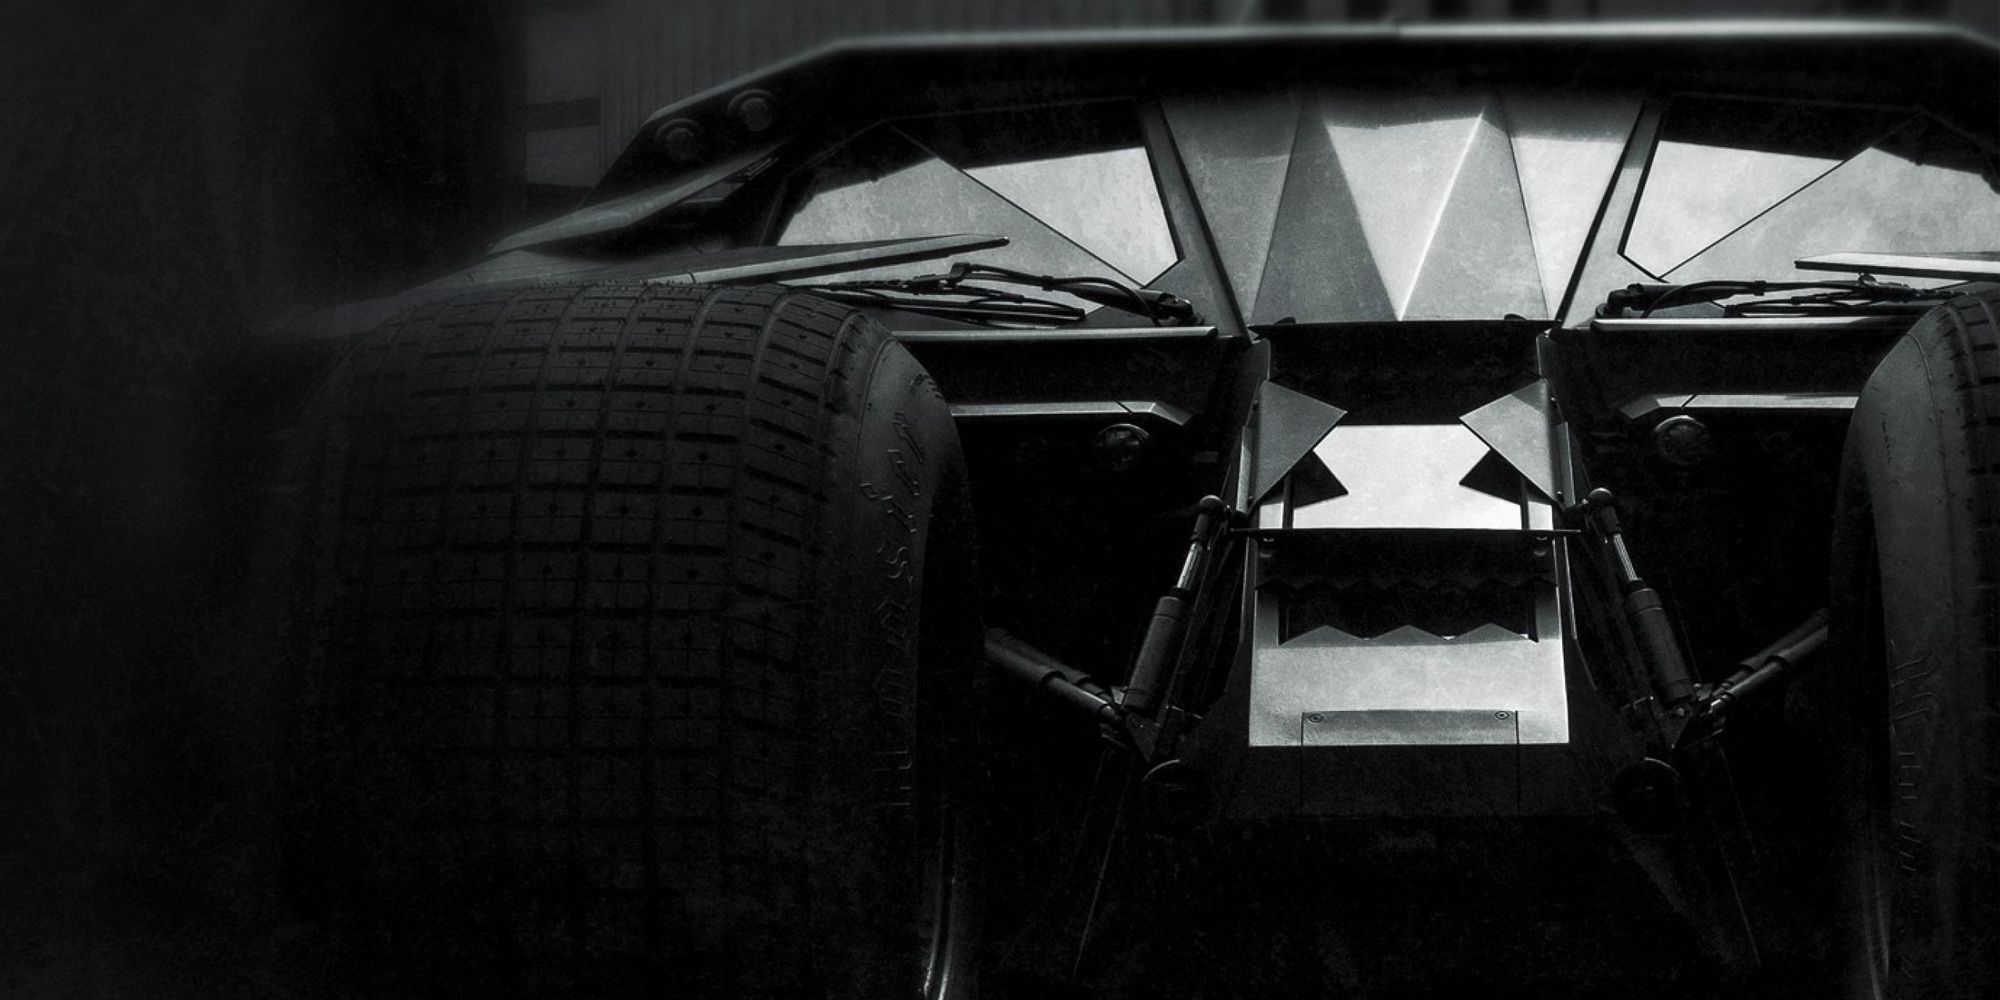 Details of the Tumbler